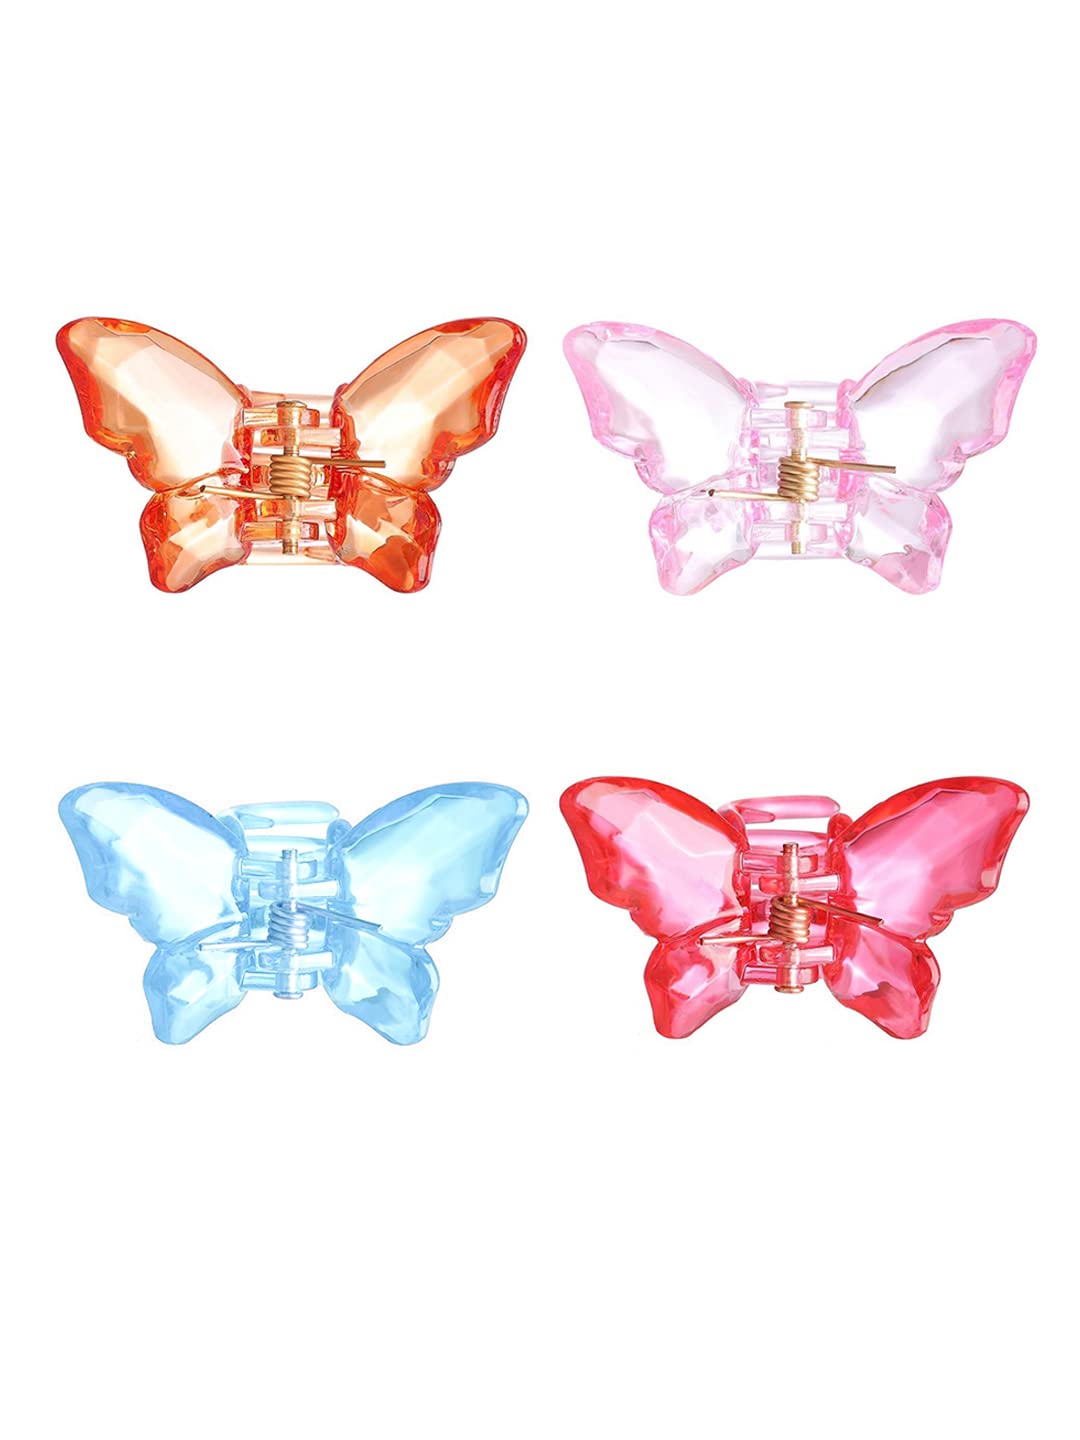 Yellow Chimes Claw Clips for Women Hair Clutches for Women Hair Accessories For Women Set of 4 Pcs Claw Clip Multicolor Butterfly Clips Big Clutchers for Hair Clear Crystal Effects Hair Decorative Gift for Women & Girls